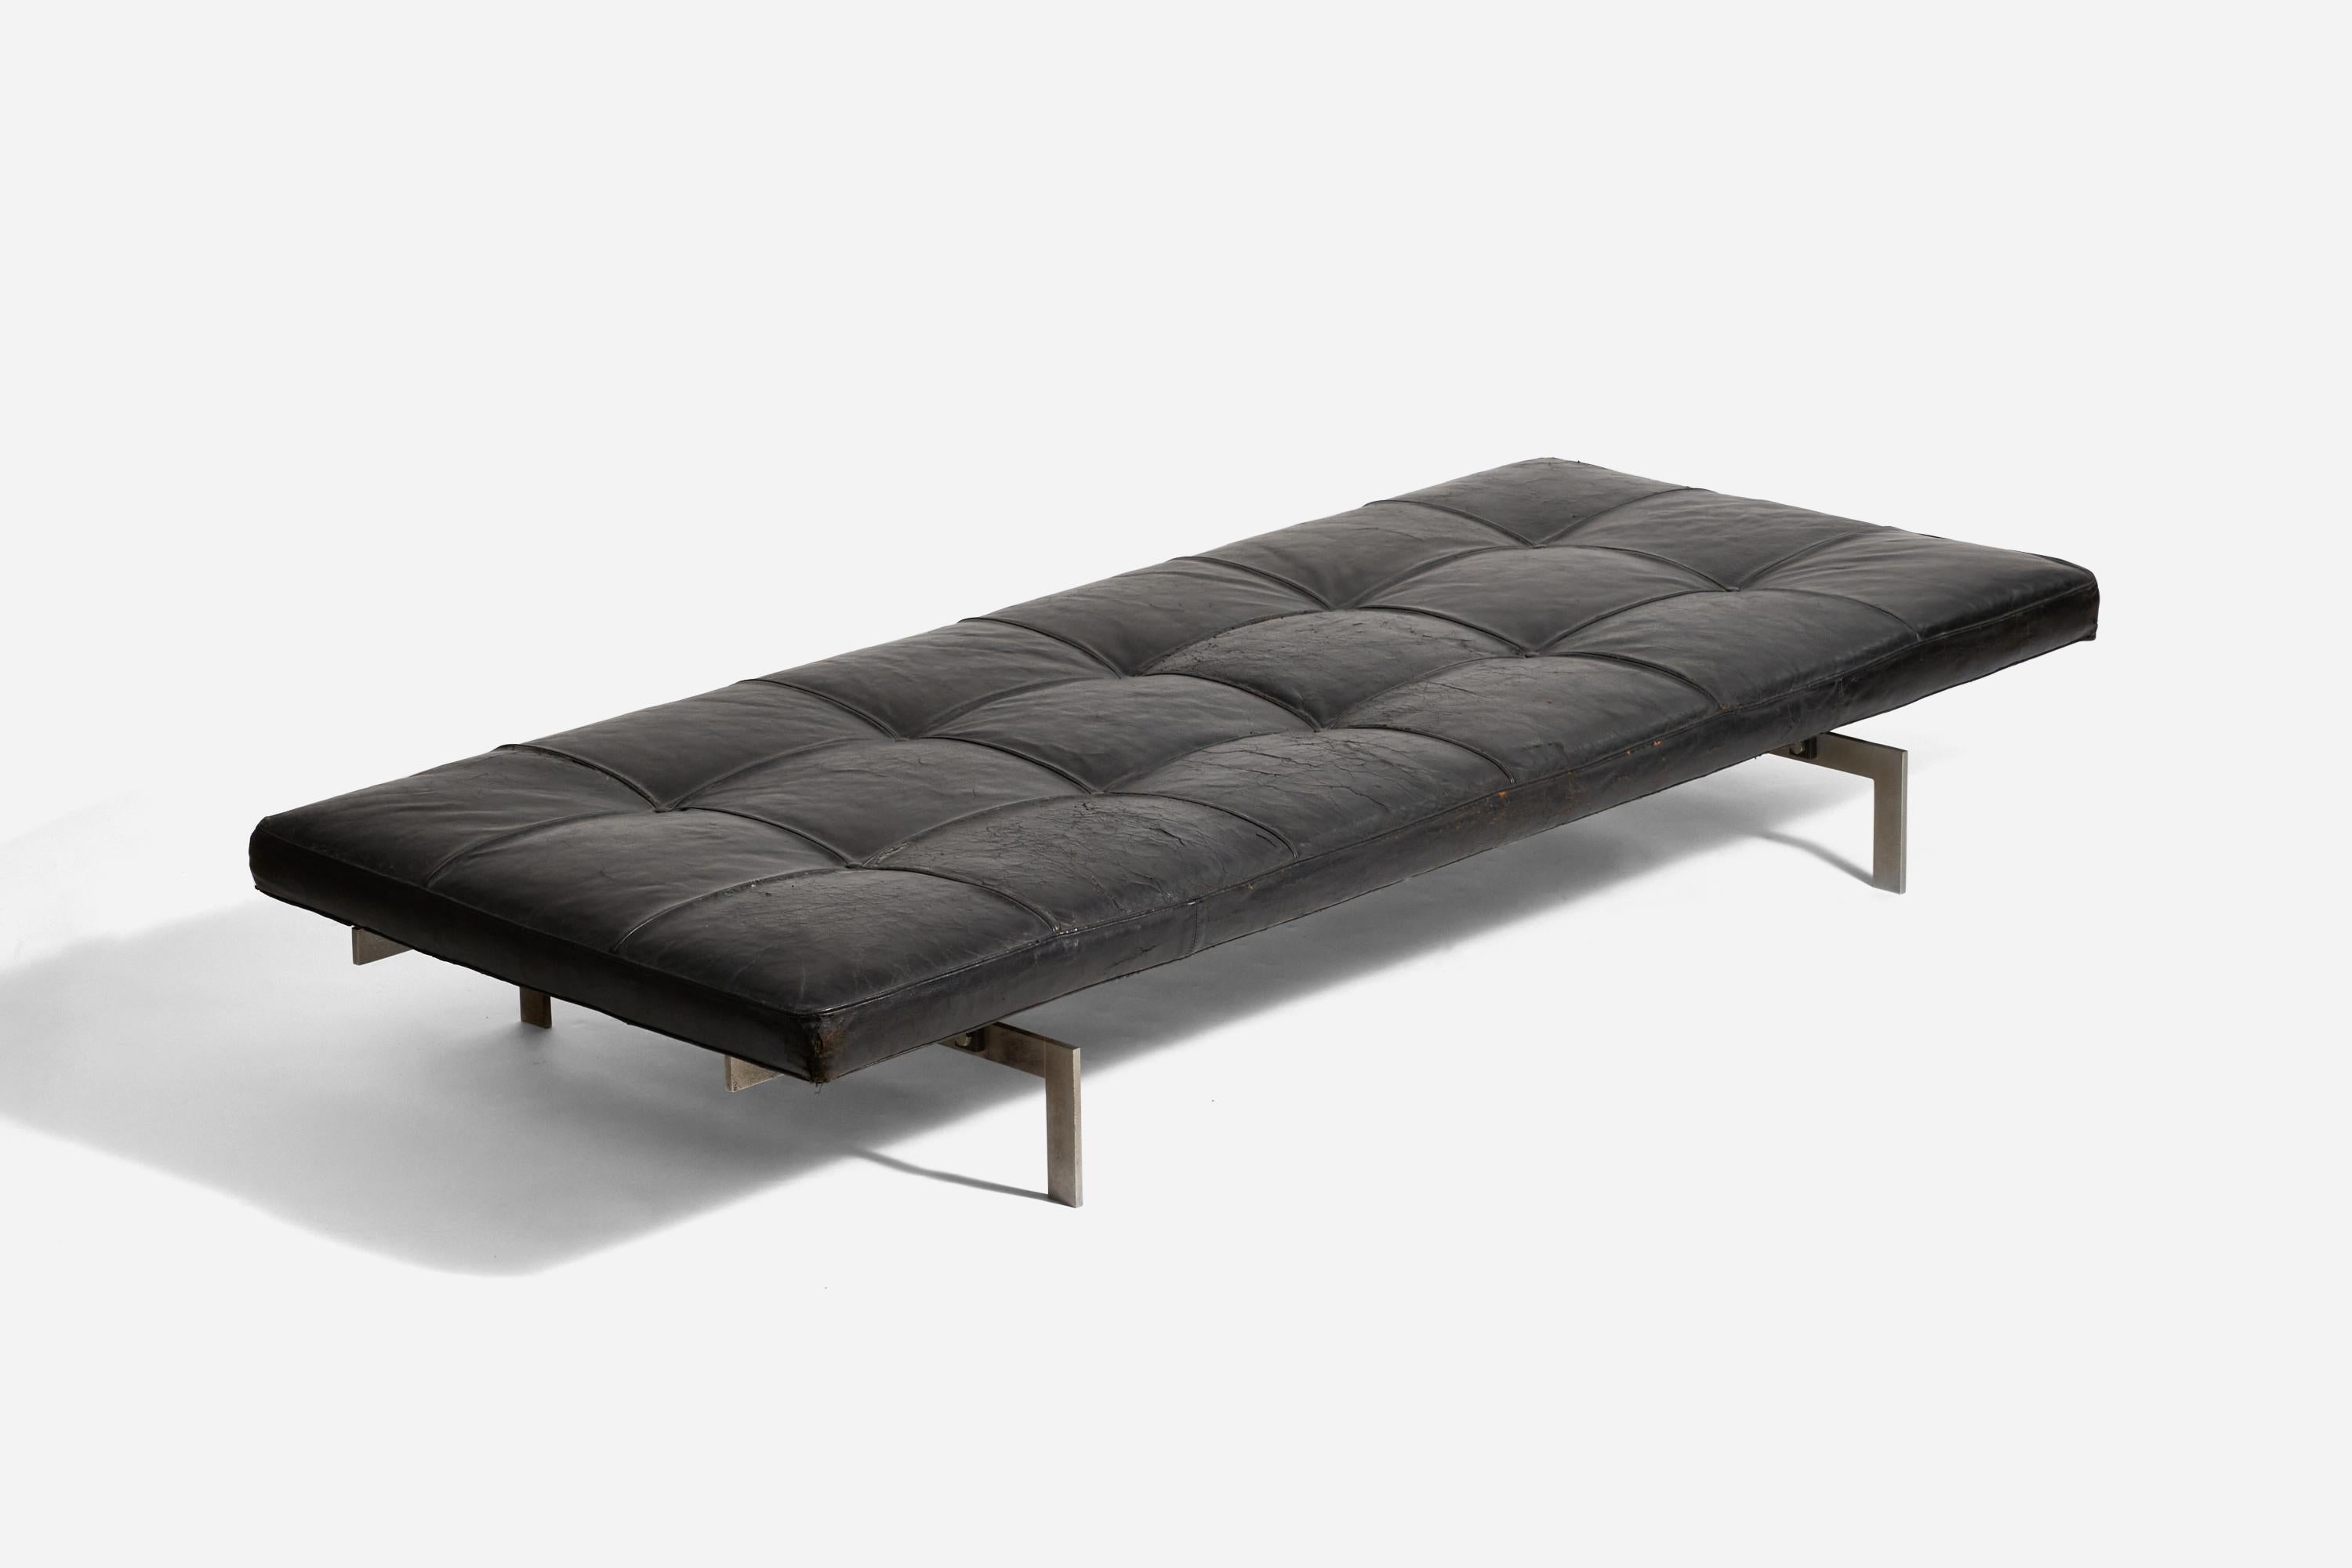 A leather, steel and plywood daybed designed by Poul Kjaerholm and produced by E Kold Christensen, Denmark, 1960s. 